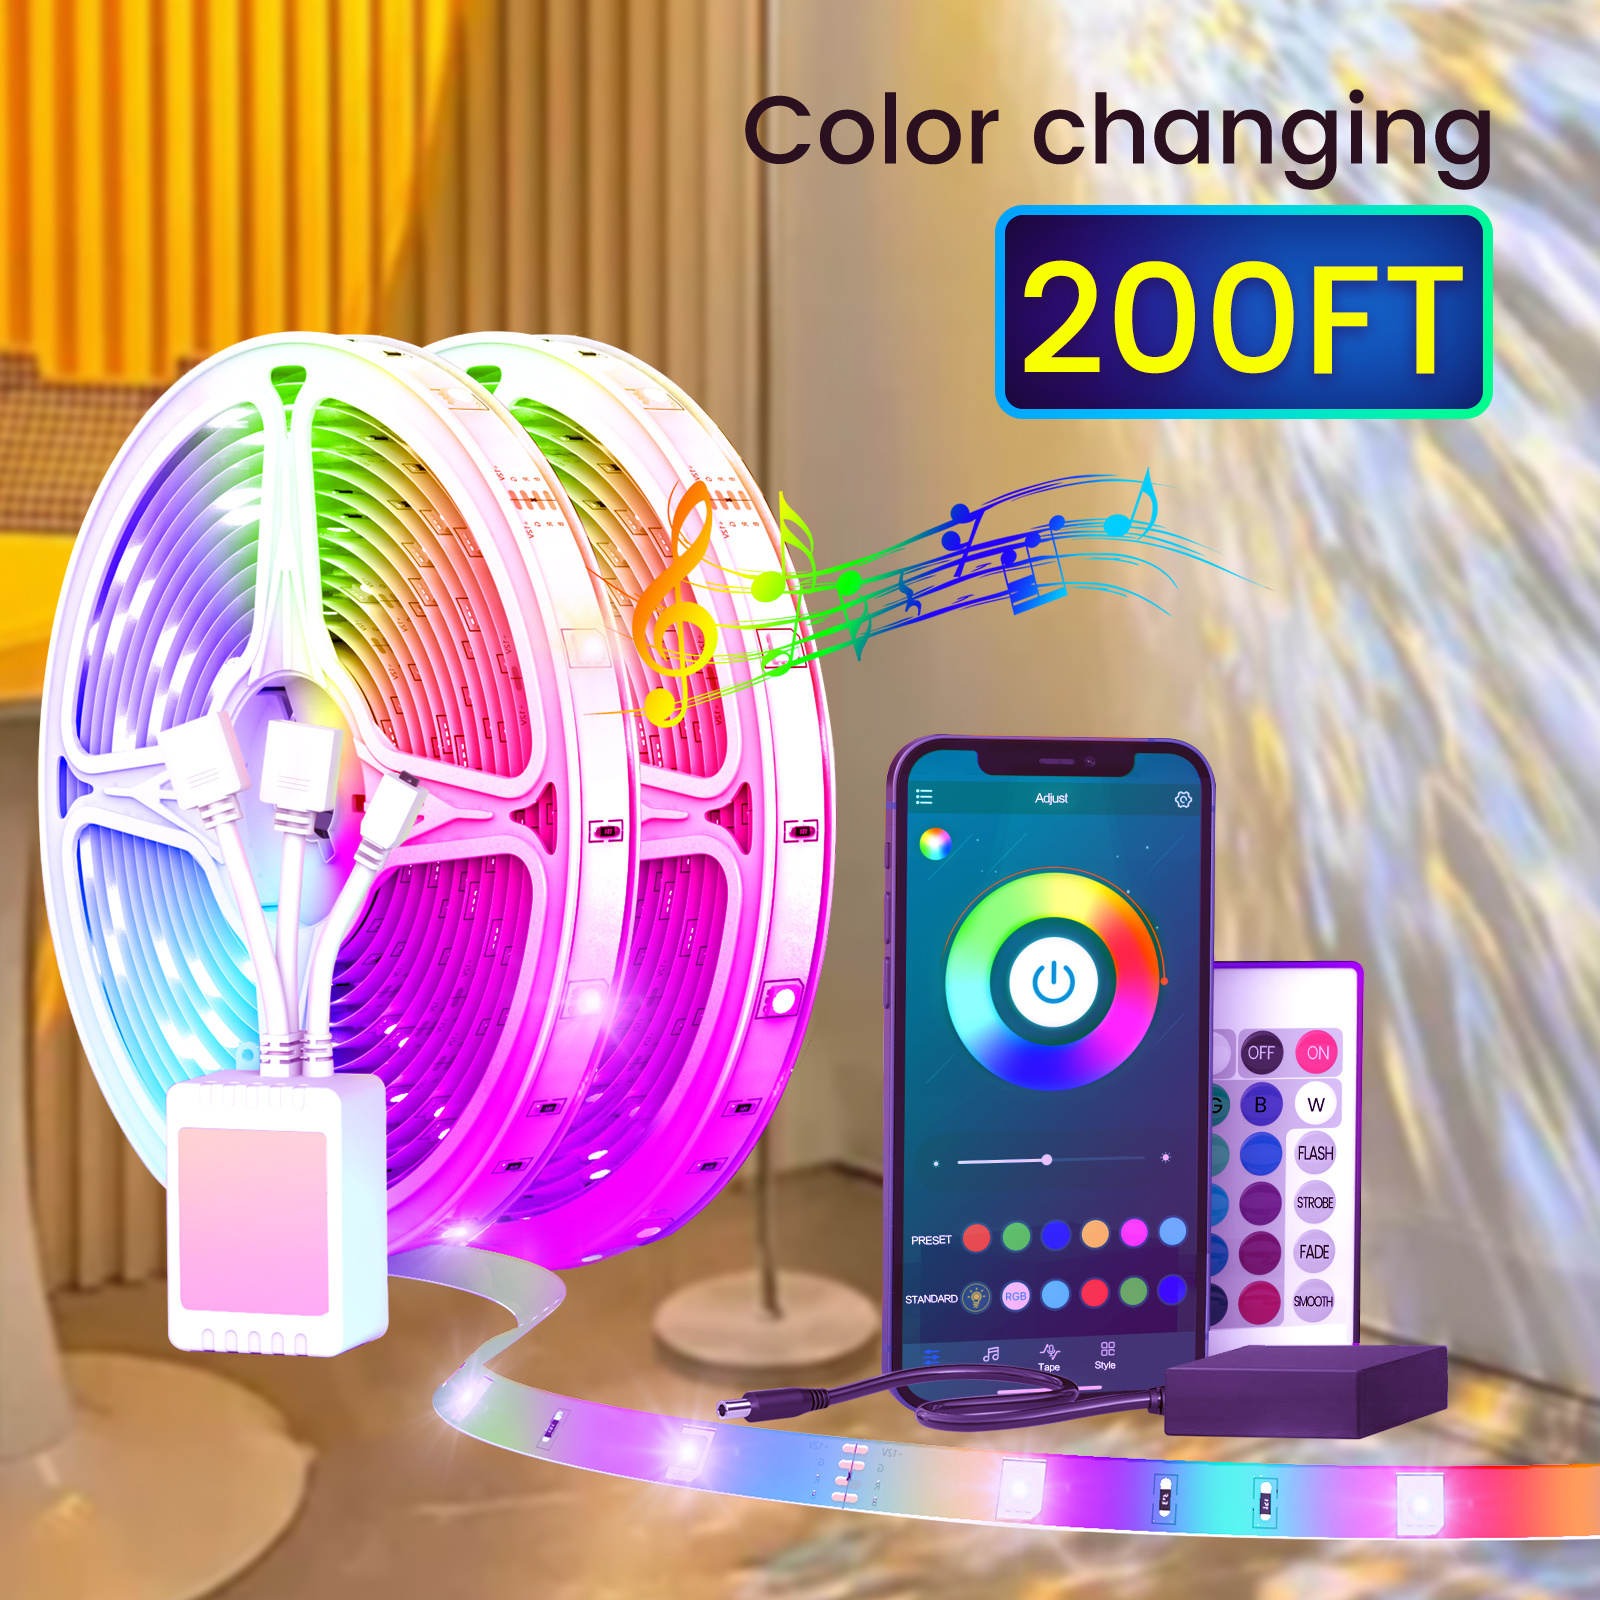 

25/ 50/ 100/ 130/ 200 Ft Rgb Led Light Strip, Smart Light Strip, Application Control And Remote Control, 24 Volt, Music Sync Color Changing Light, Suitable For Rooms, Parties, Home Decor